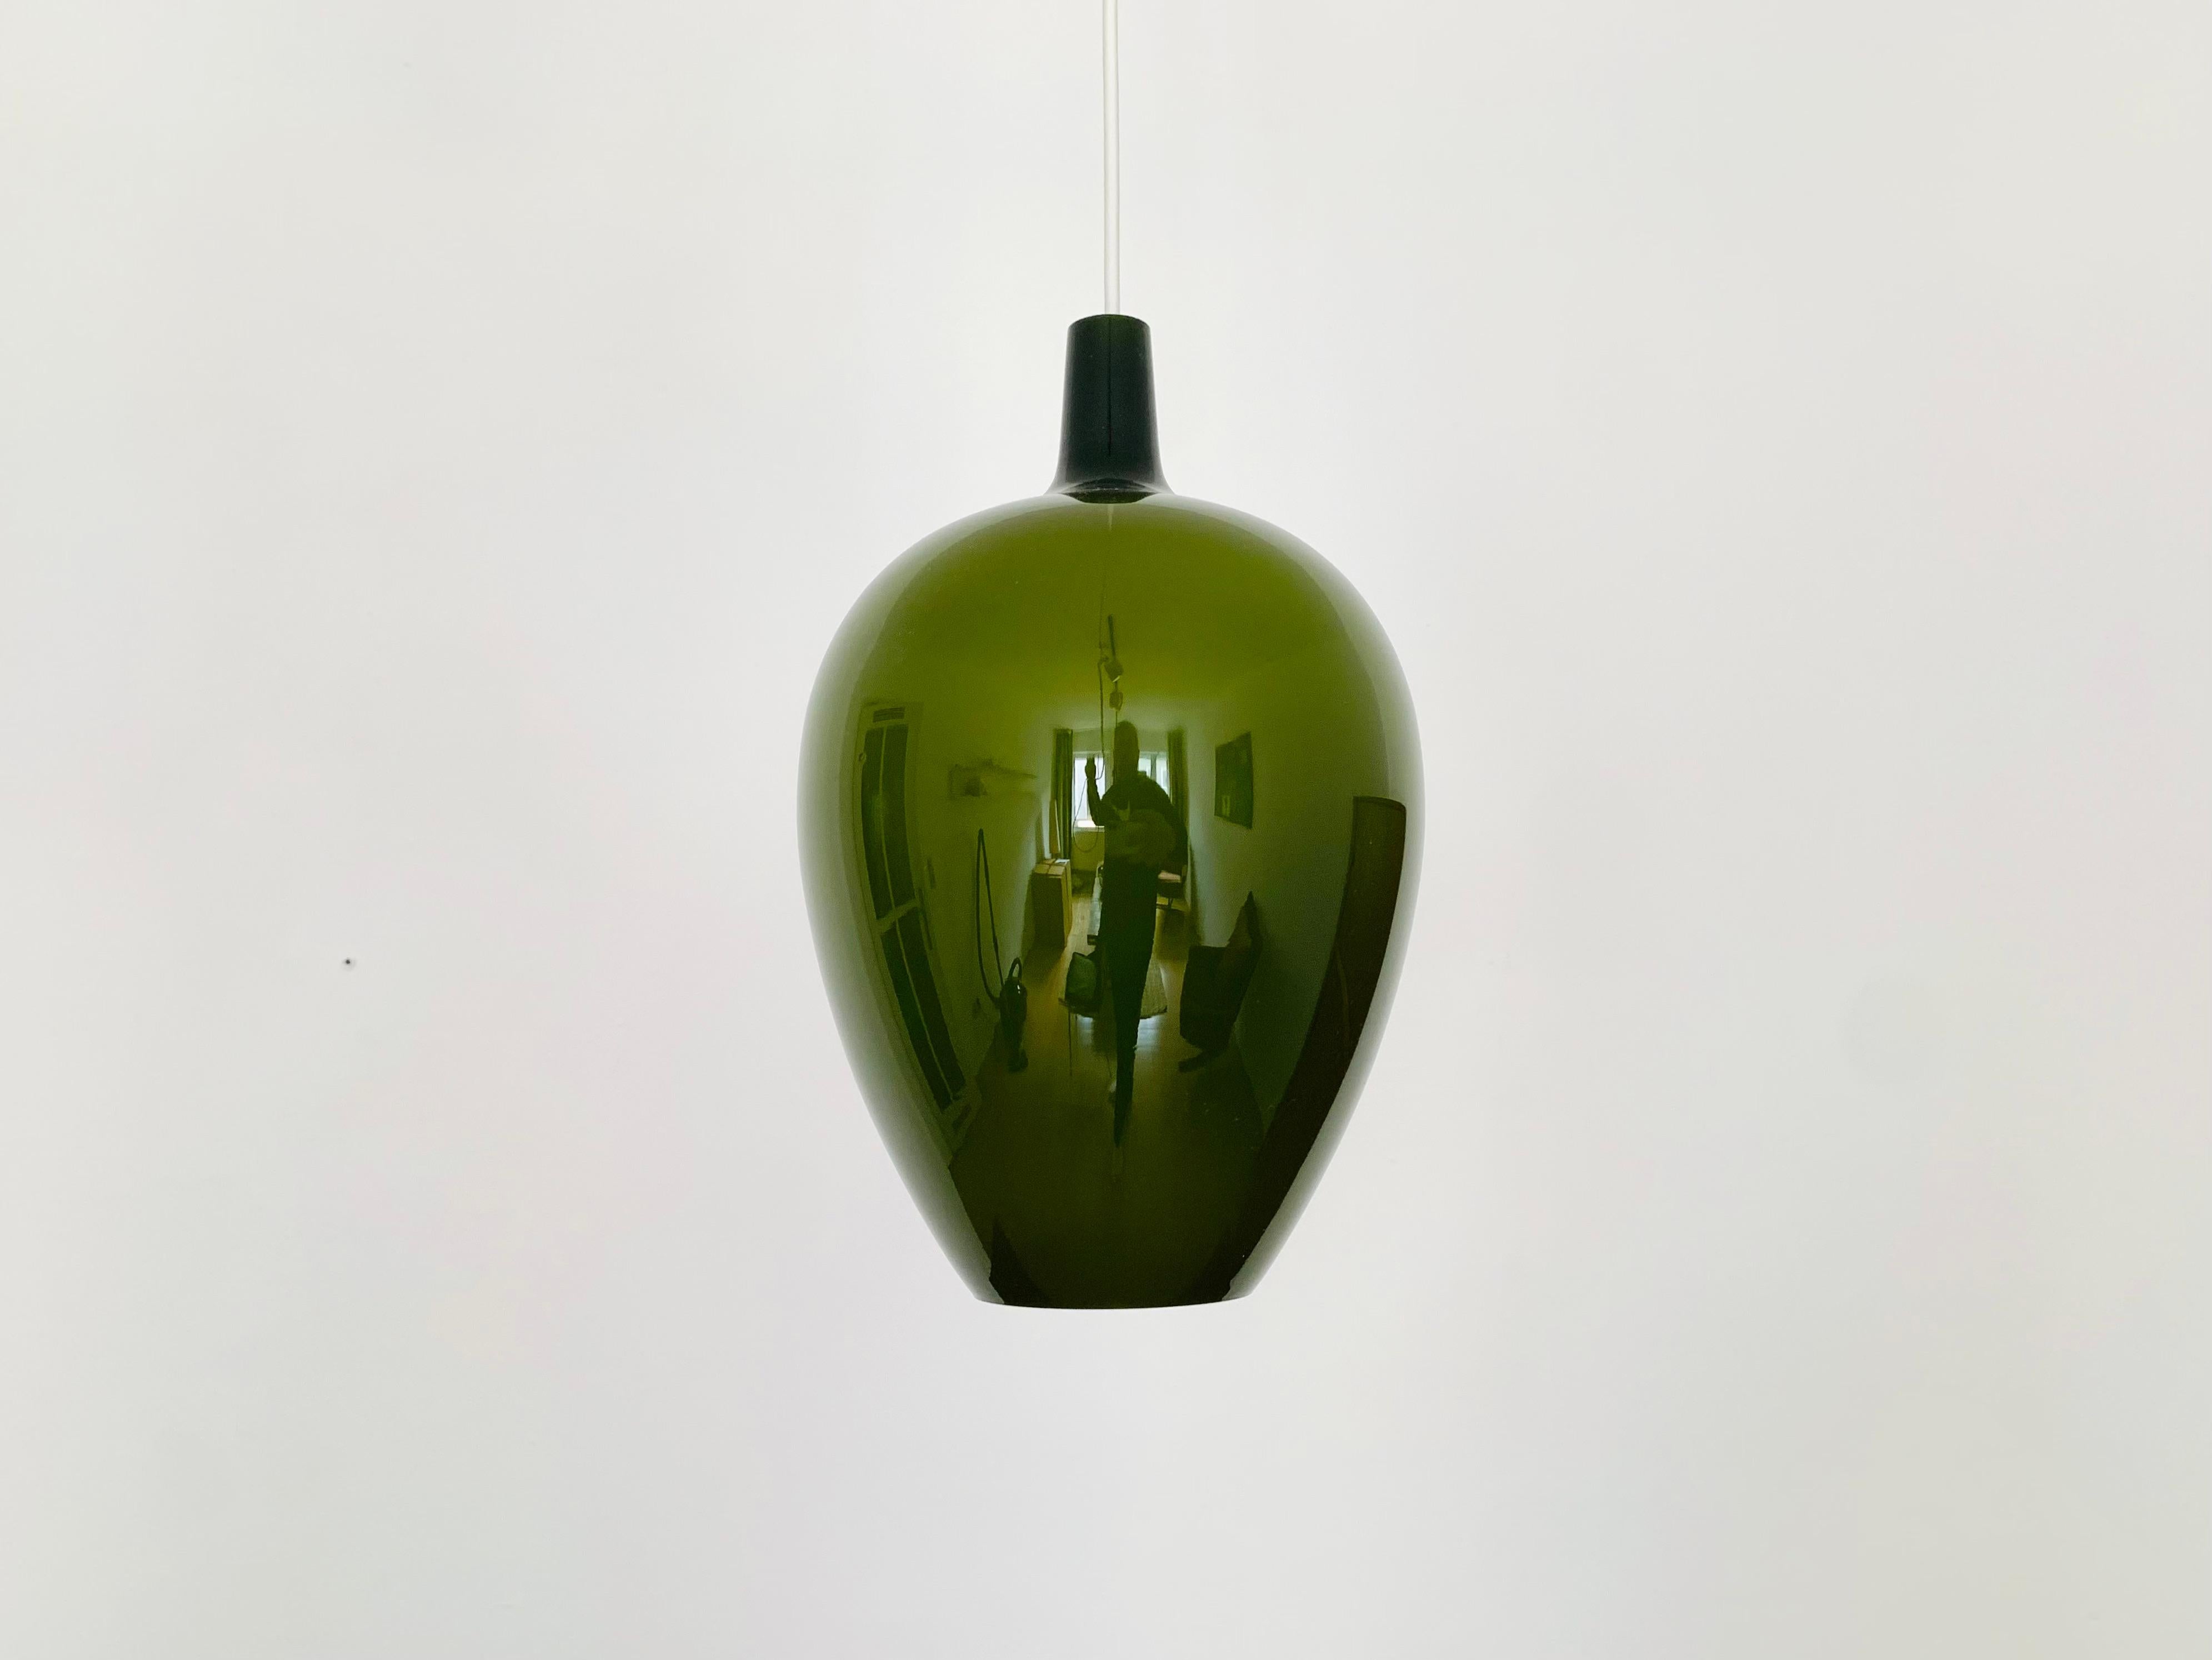 Wonderful Danish glass pendant lamp from the 1960s.
The design makes the lamp a real asset and an absolute favorite for every home.
A comfortable light is created.

Design: Jo Hammerborg
Manufacturer: Fog and Morup

Condition:

Very good vintage